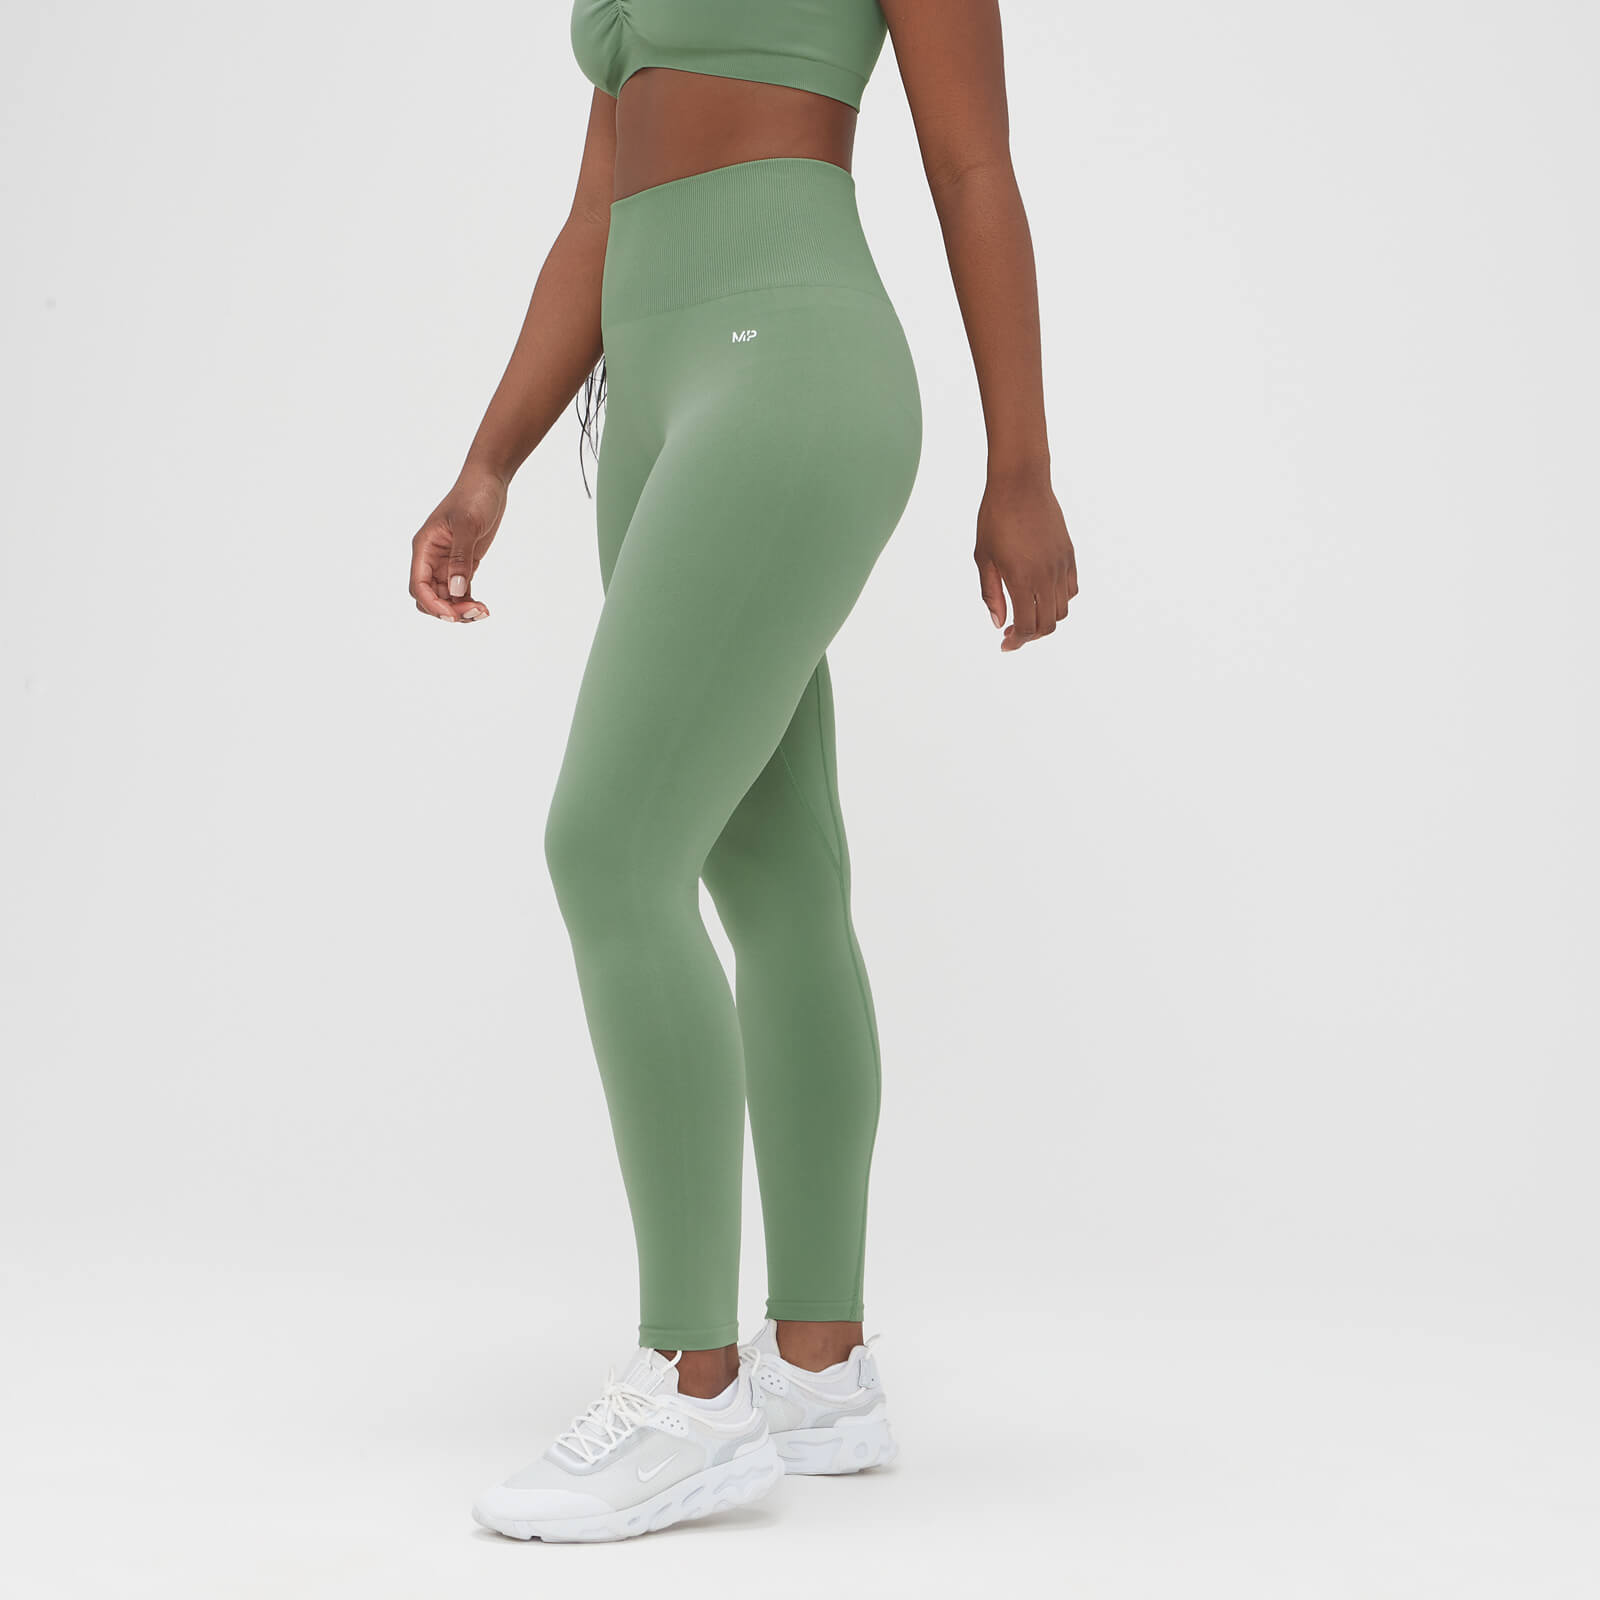 MP Women's Washed Seamless Leggings - Washed Jade - XS